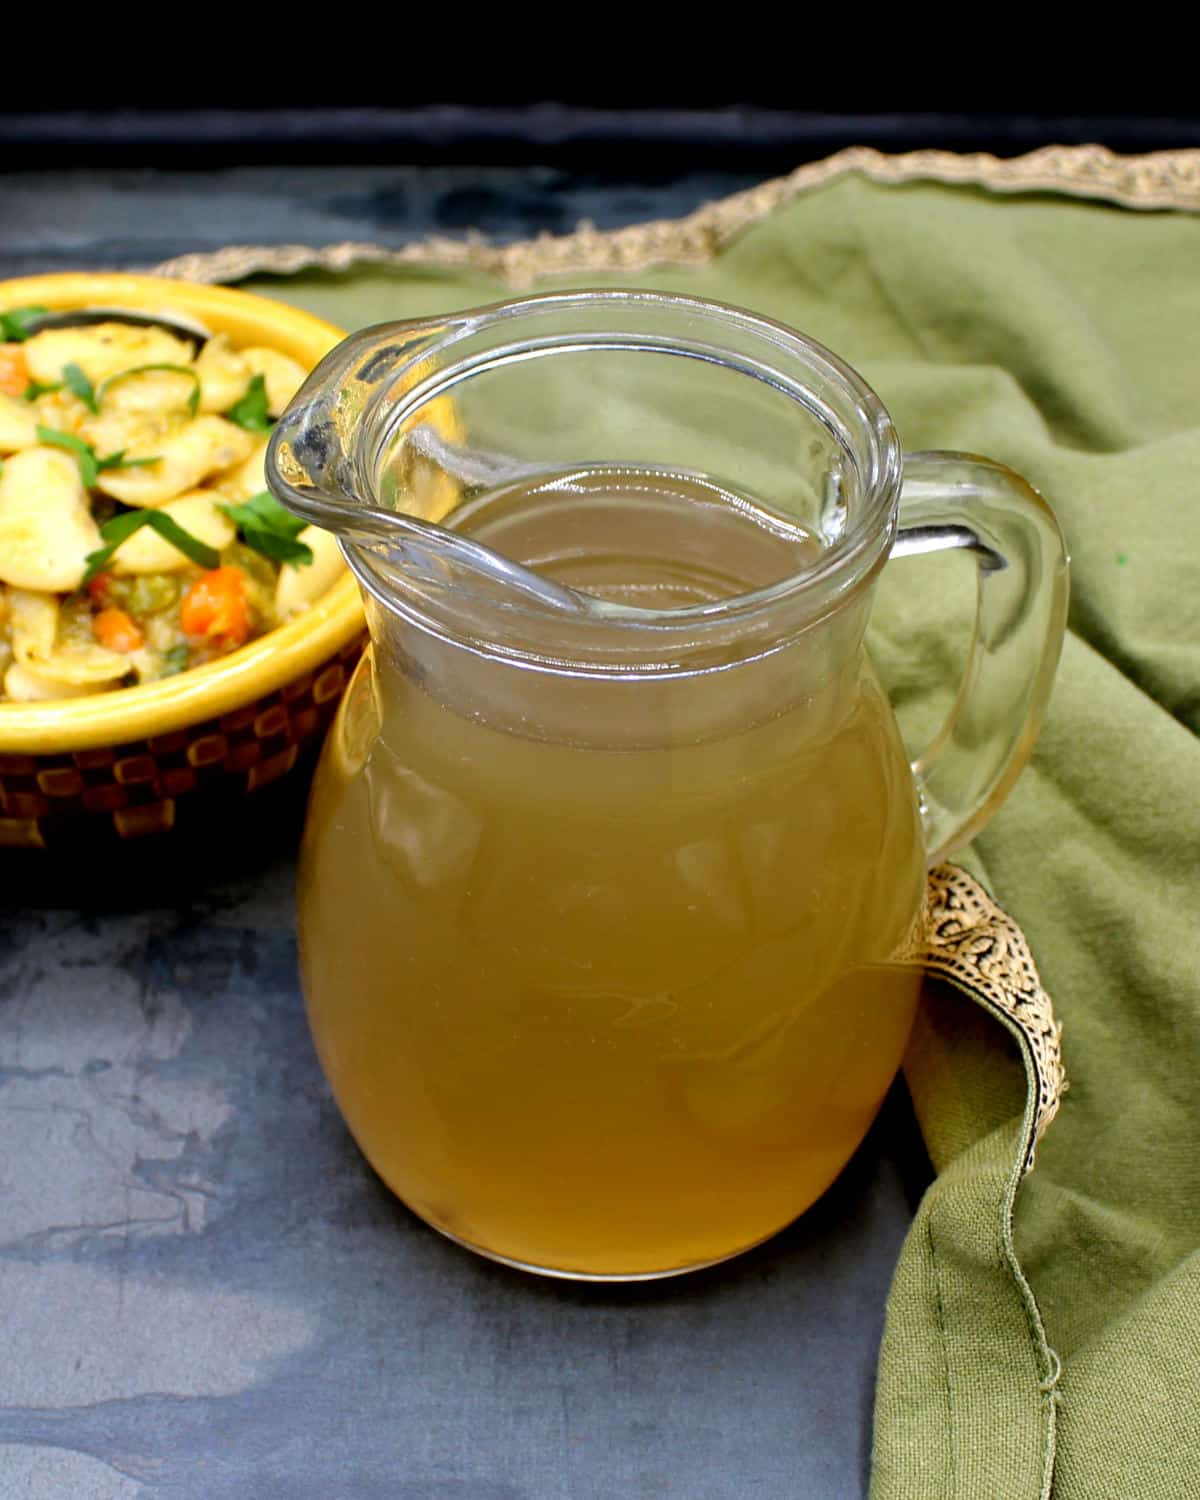 Vegetable stock in glass pitcher with a bean dish in background.